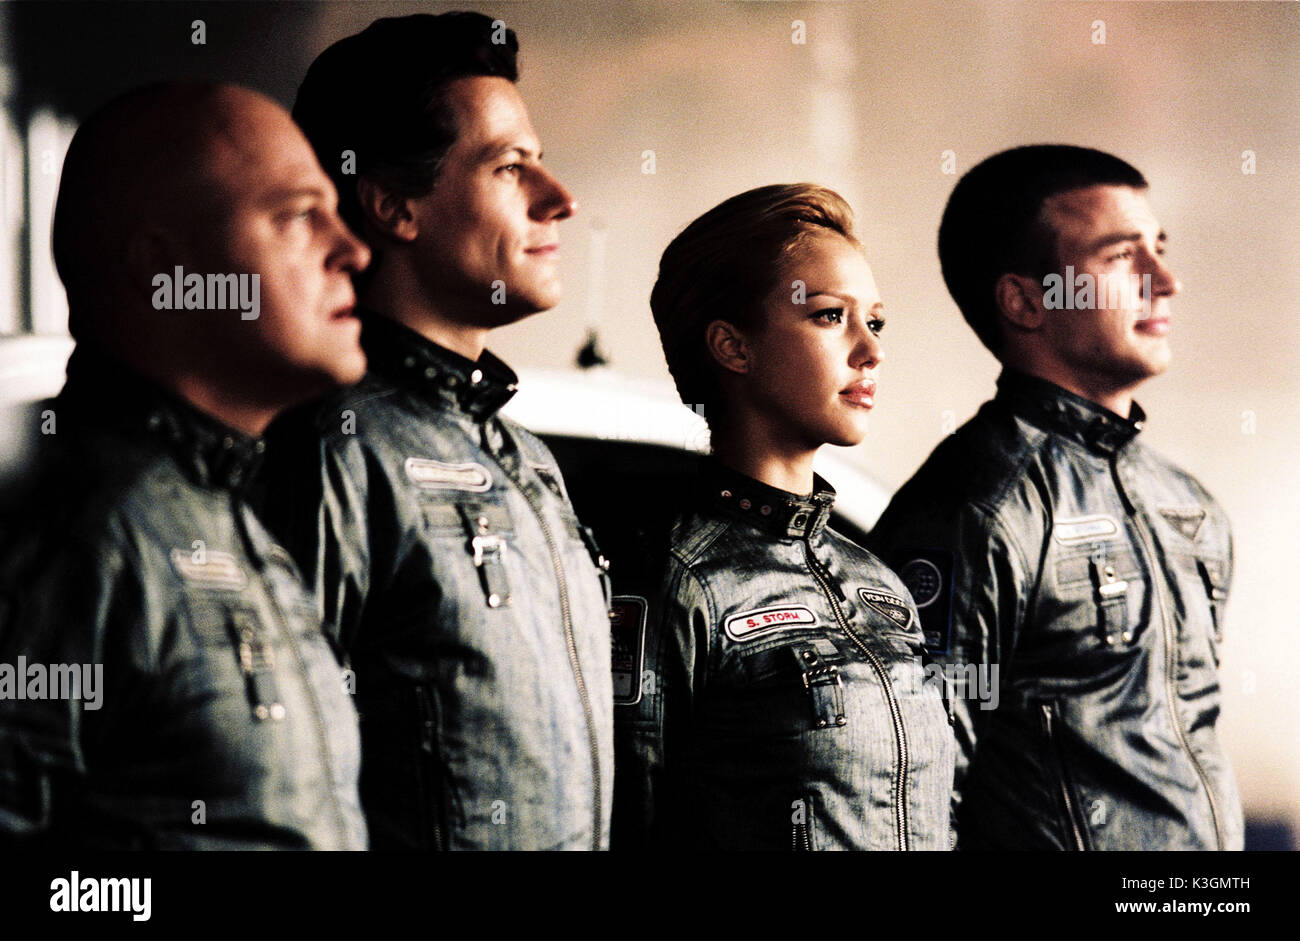 Fantastic Four Please contact the Twentieth Century Fox press office for further information. FANTASTIC FOUR MICHAEL CHIKLIS as The Thing, IOAN GRUFFUDD as Mr. Fantastic, JESSICA ALBA as The Invisible Woman, CHRIS EVANS as The Human Torch     Date: 2005 Stock Photo